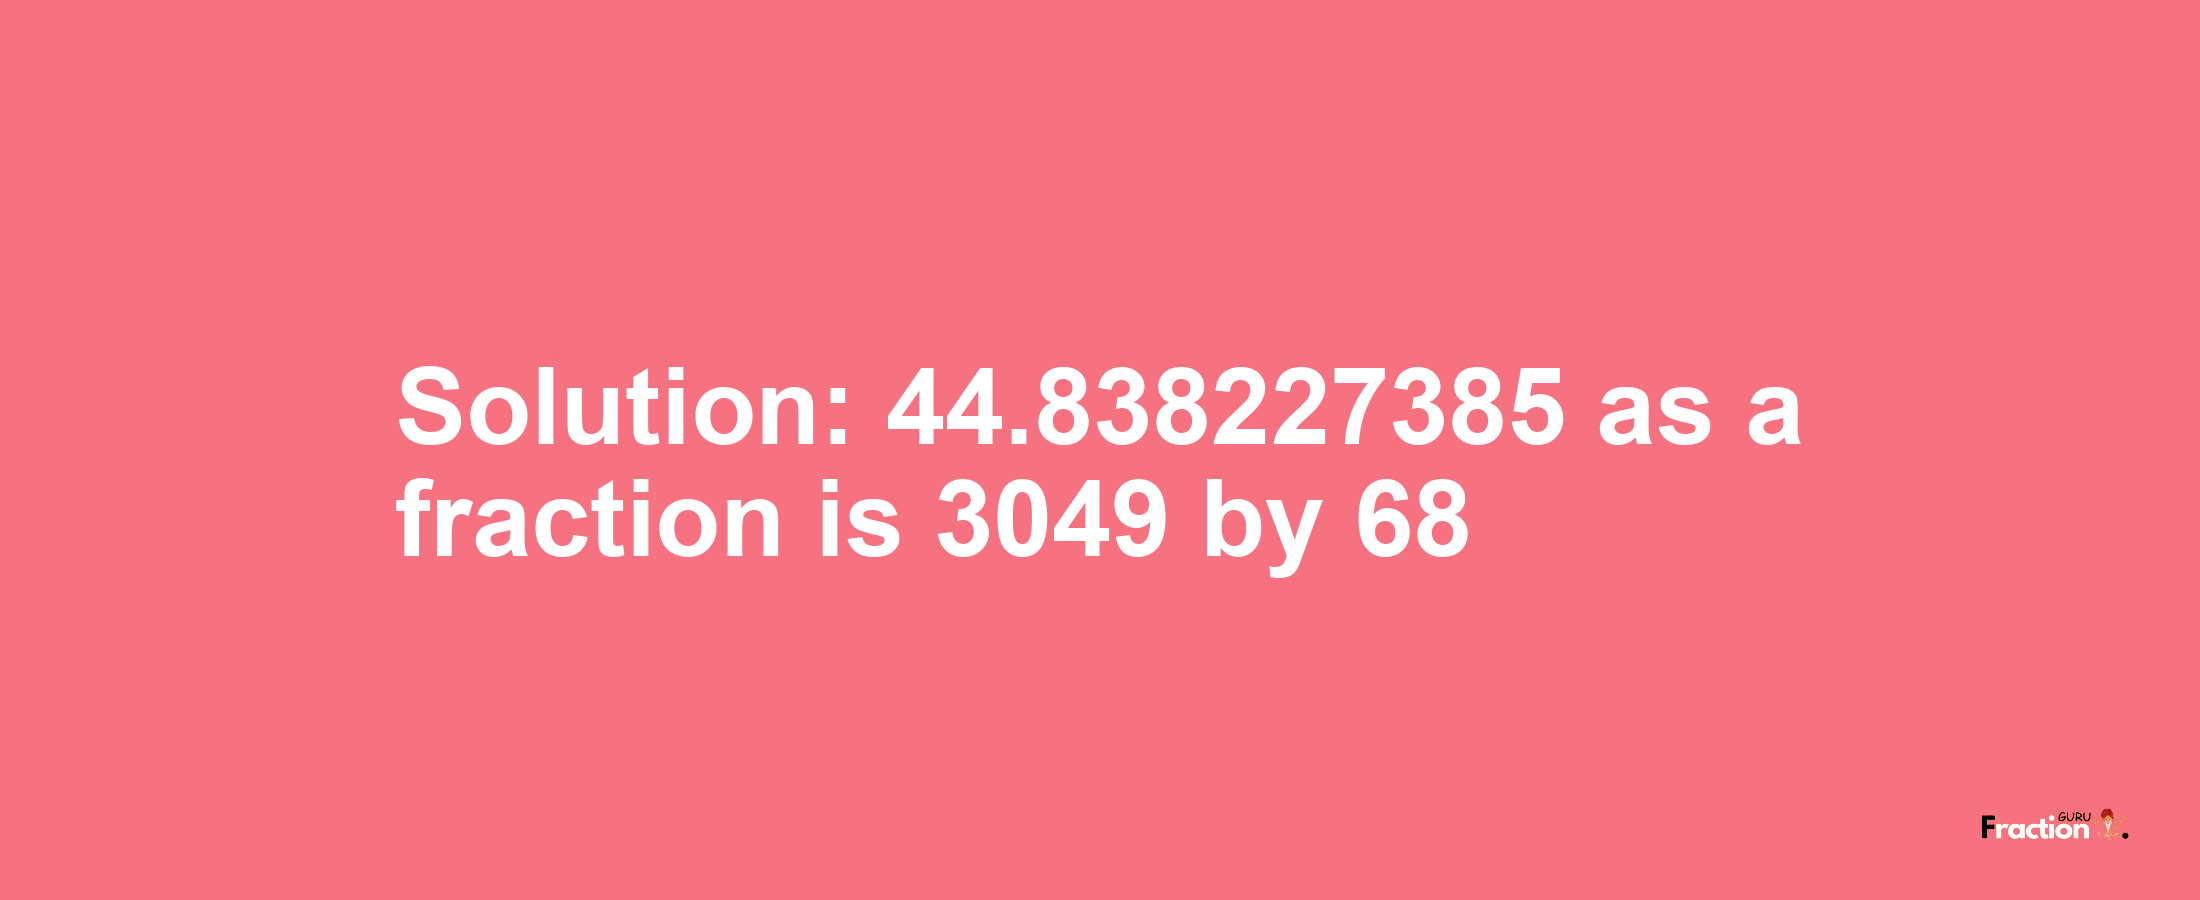 Solution:44.838227385 as a fraction is 3049/68